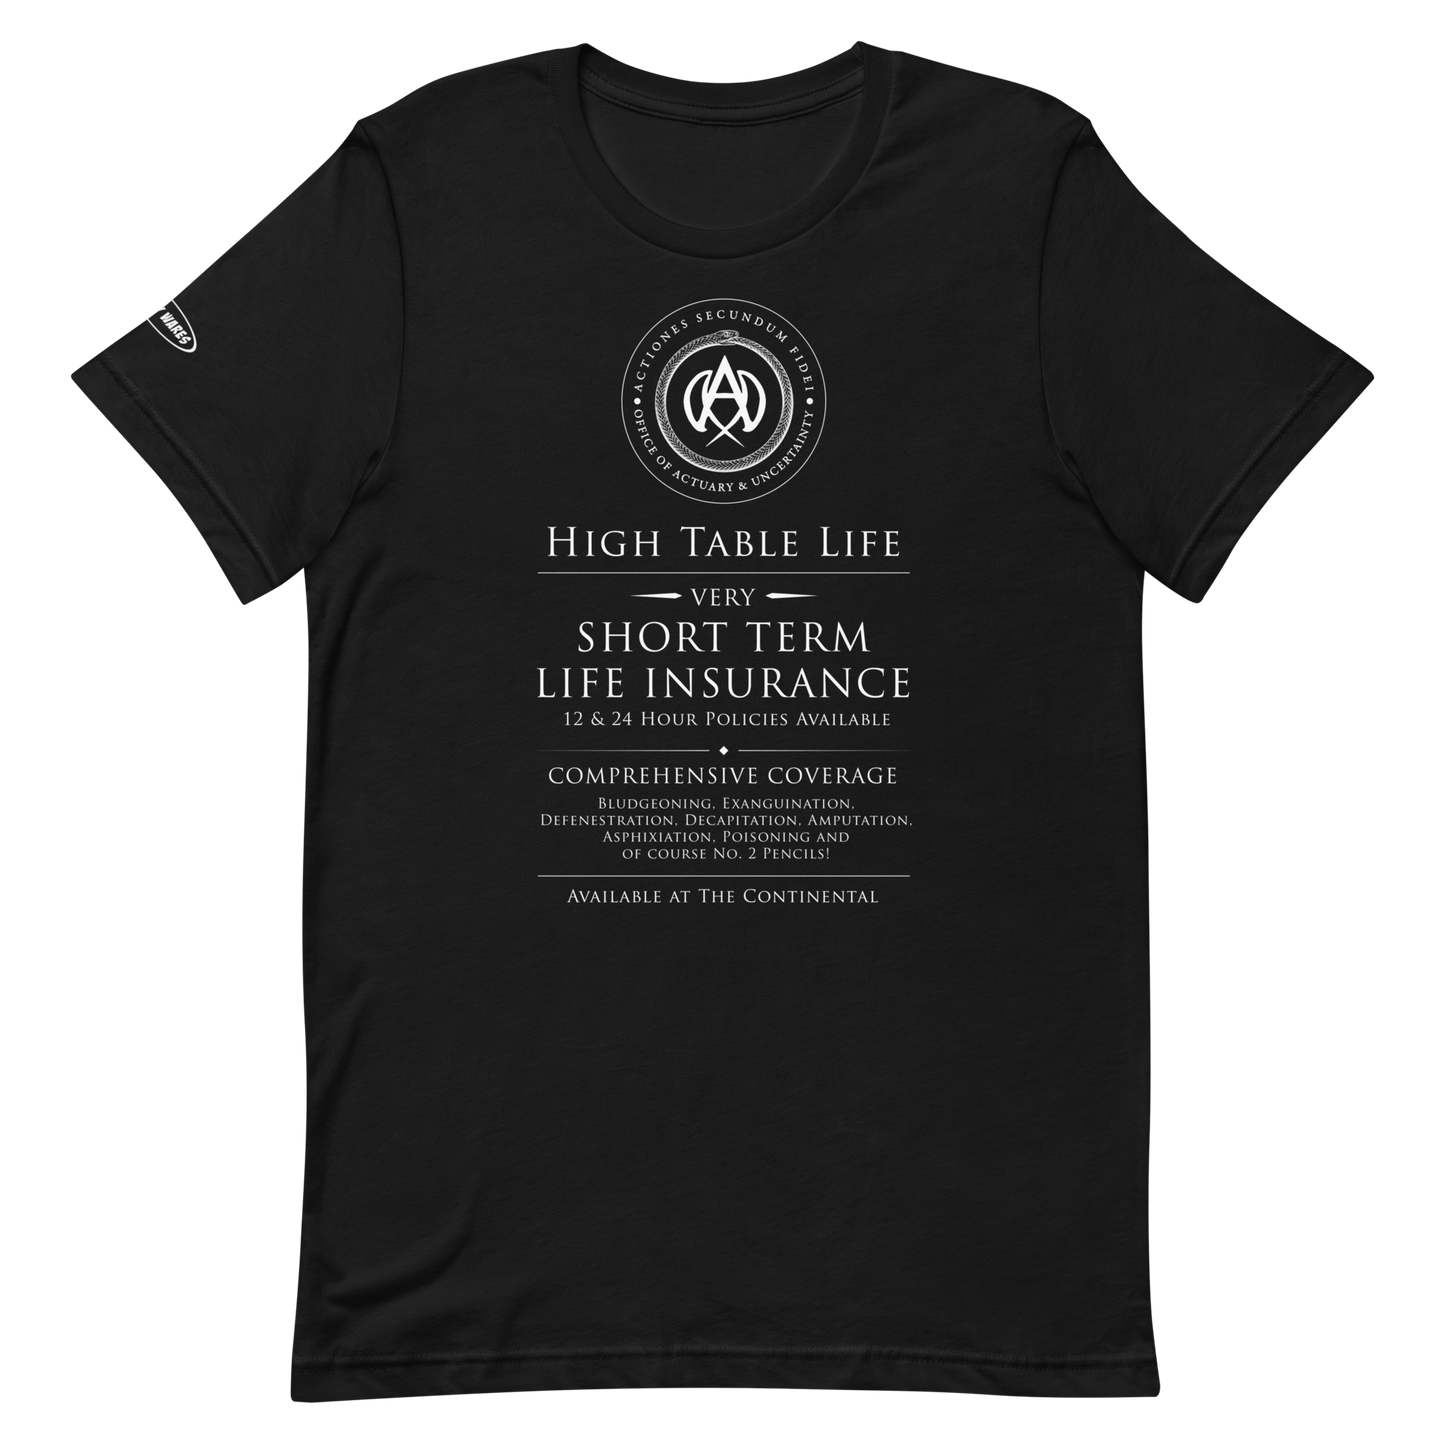 Mistah Wick - High Table Life - Funny T-Shirt